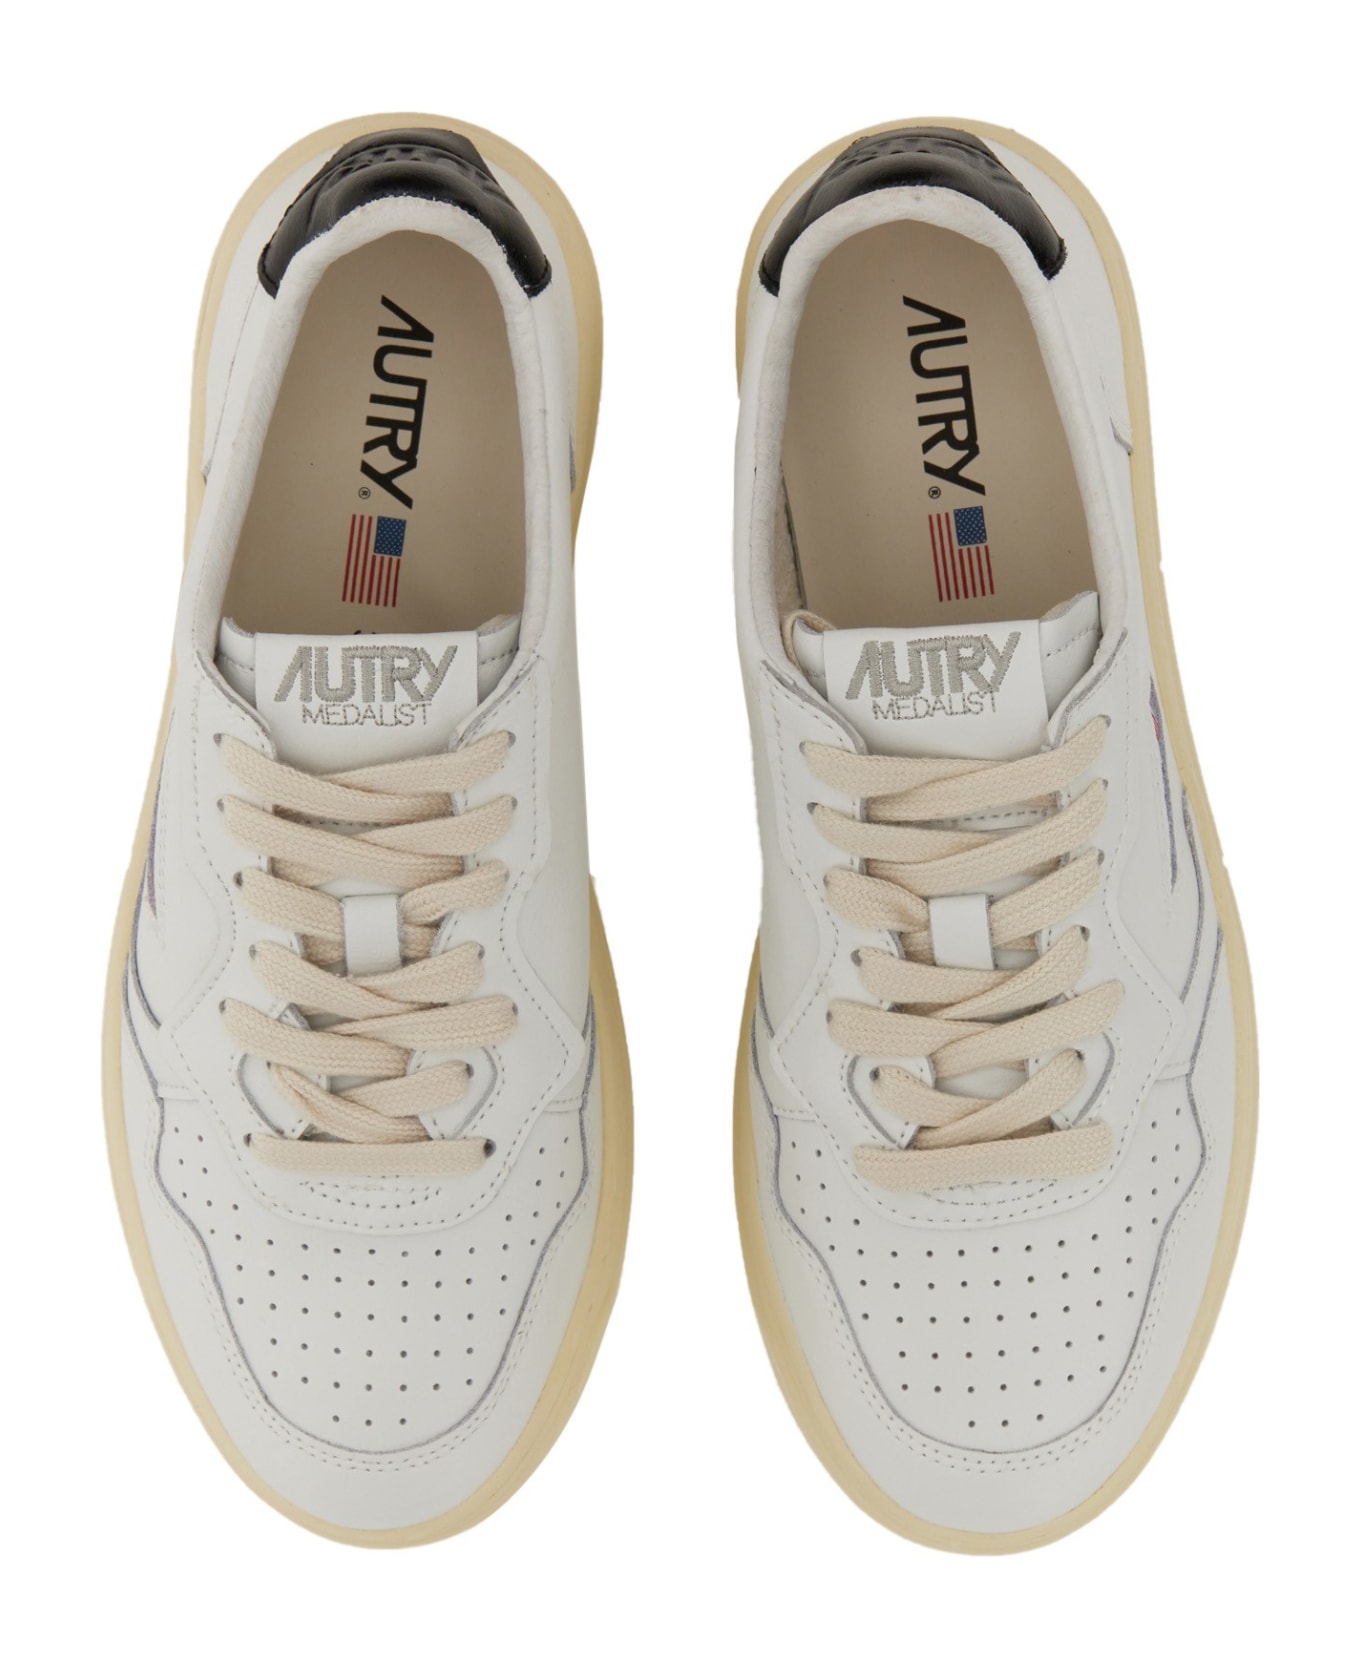 Autry Medalist Low Sneakers In White And Black Leather - Bianco スニーカー